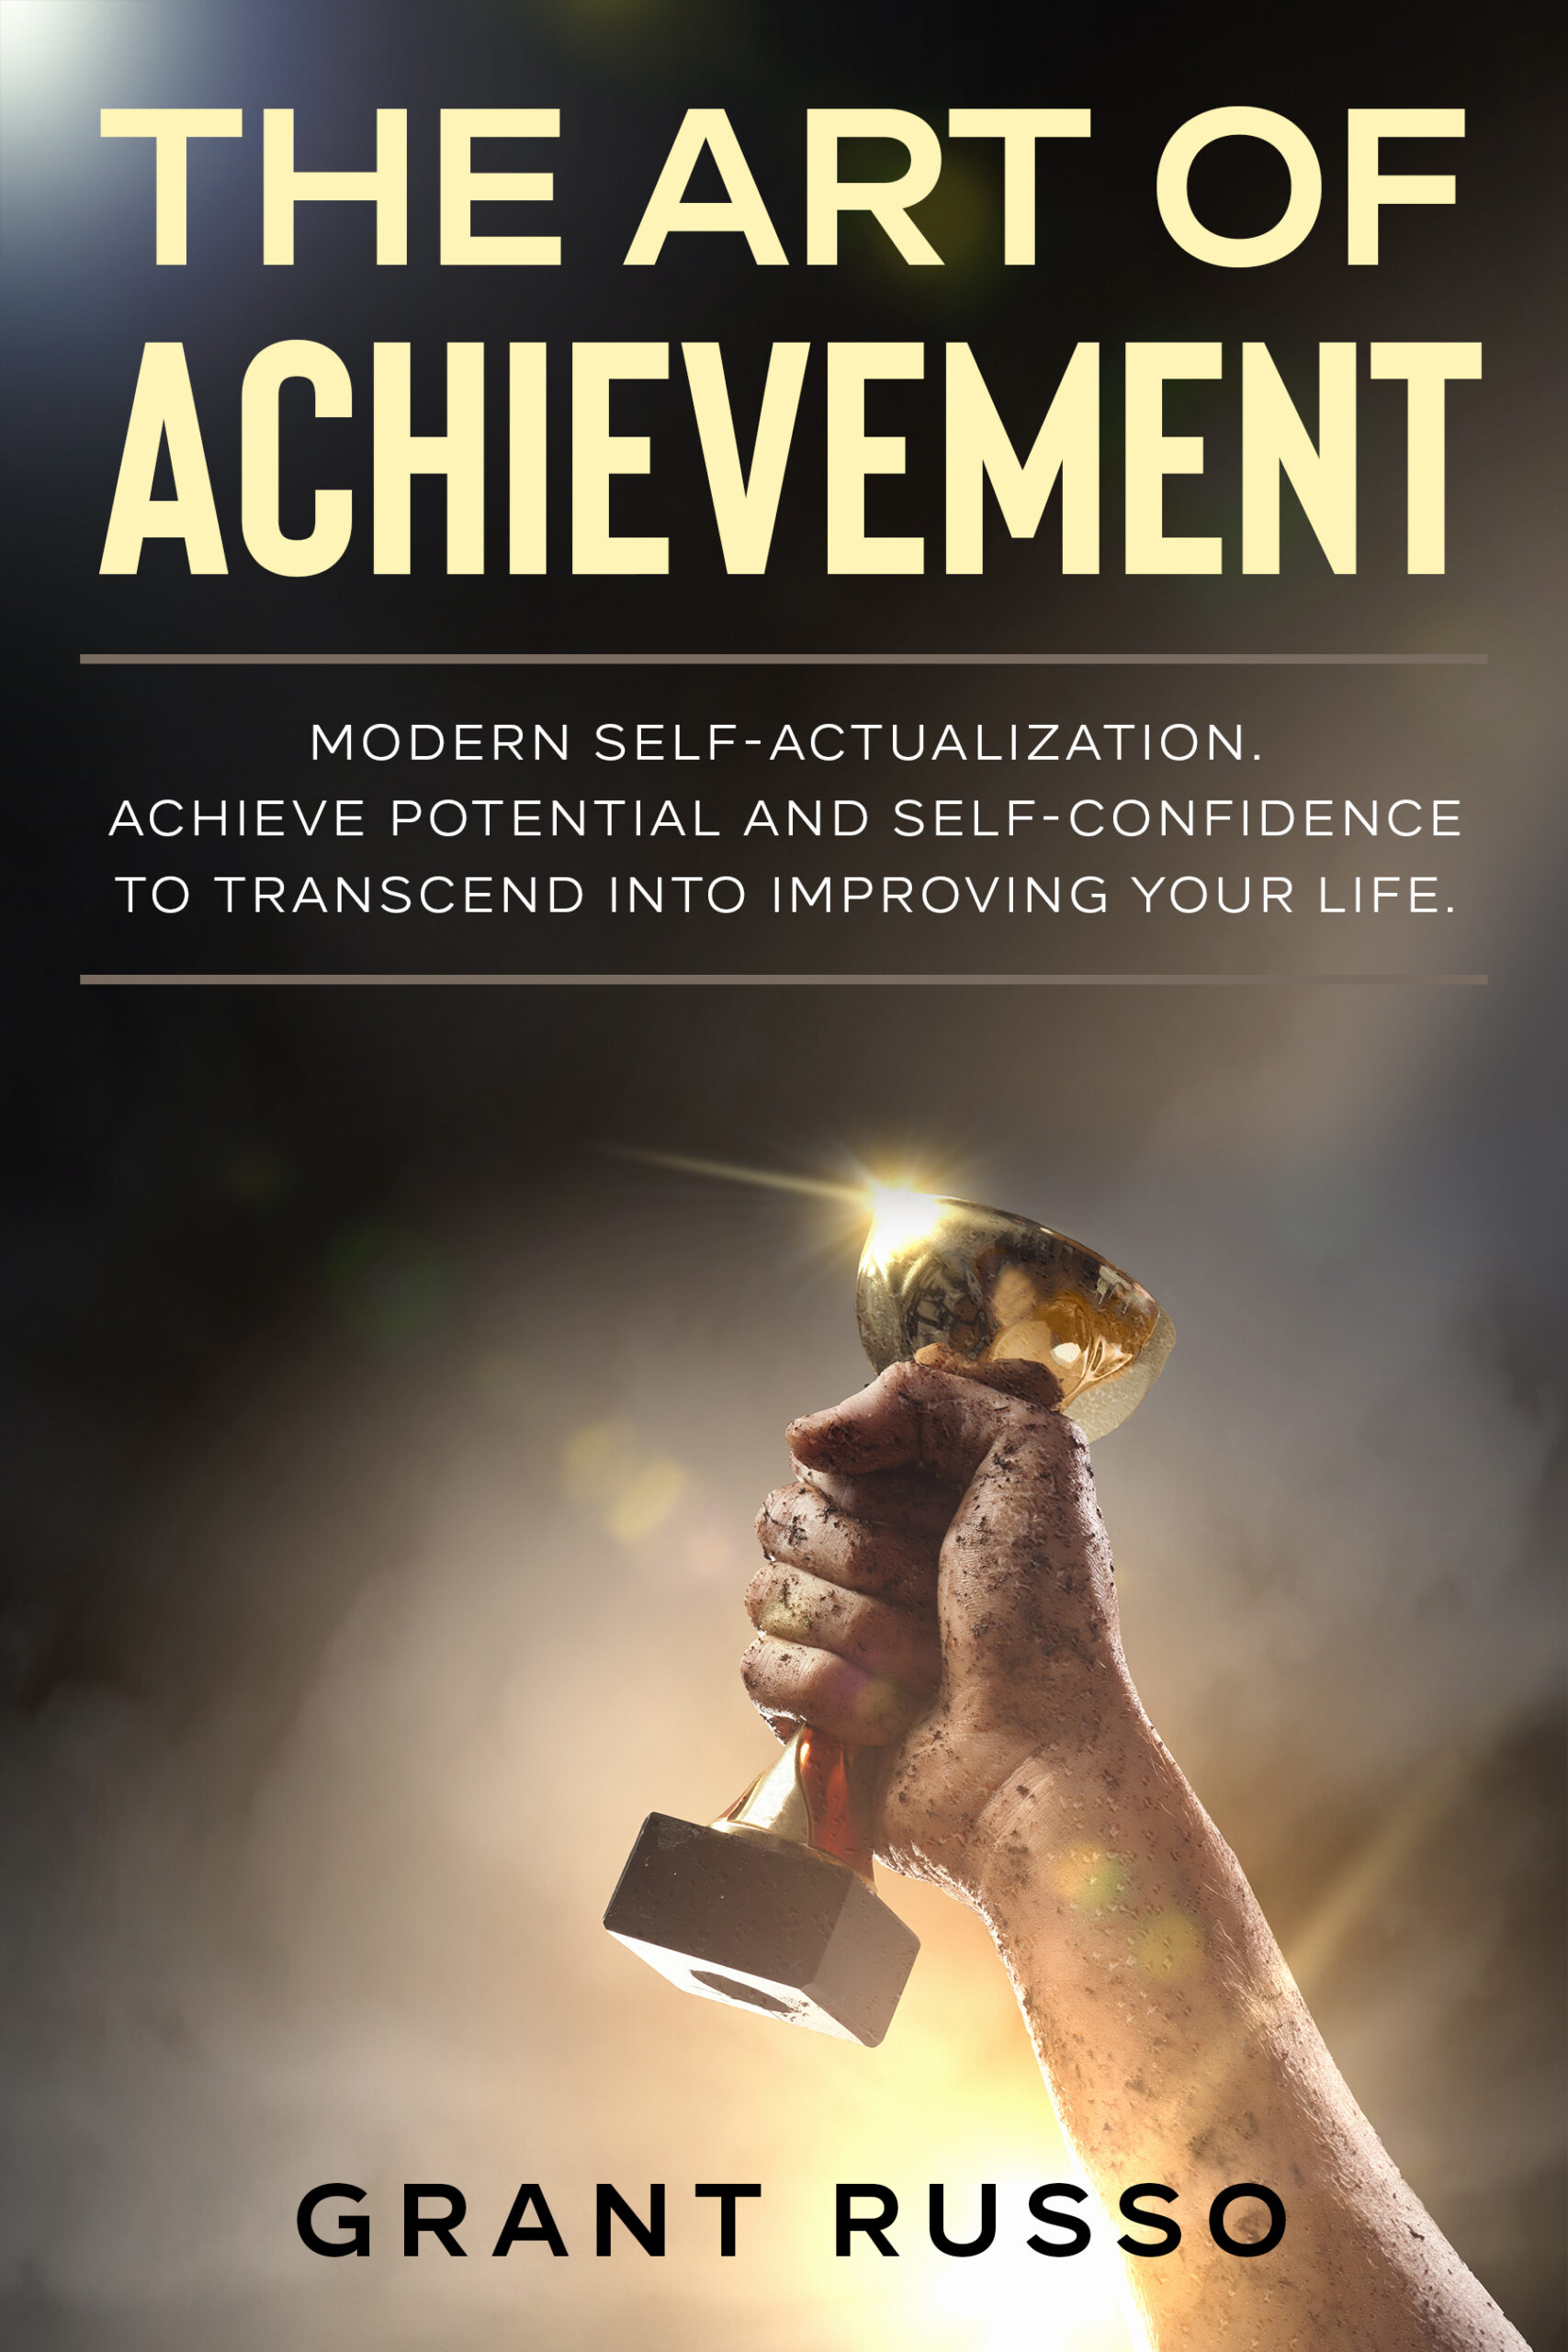 FREE: The Art of Achievement by Grant Russo